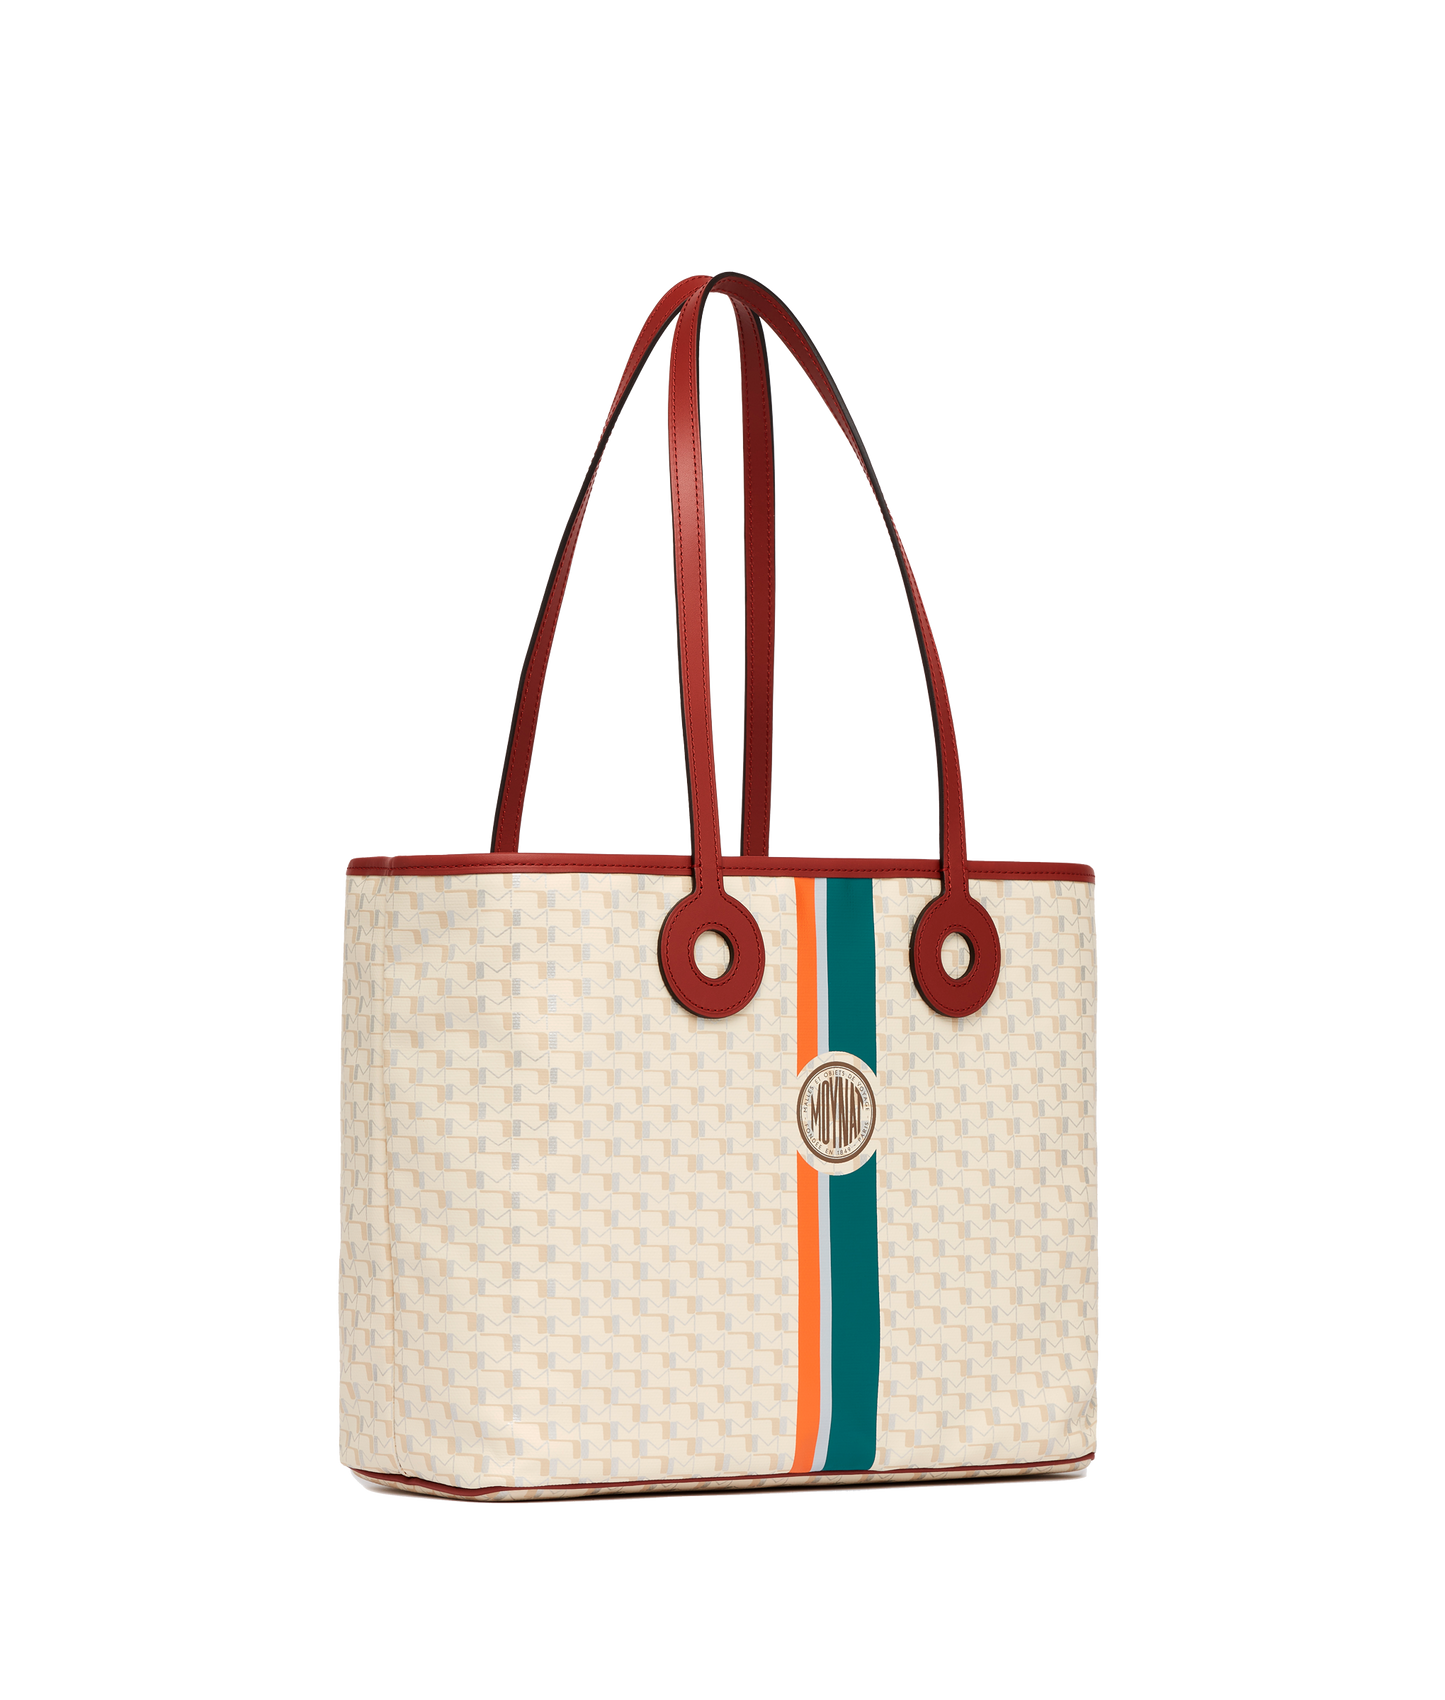 street style moynat oh tote